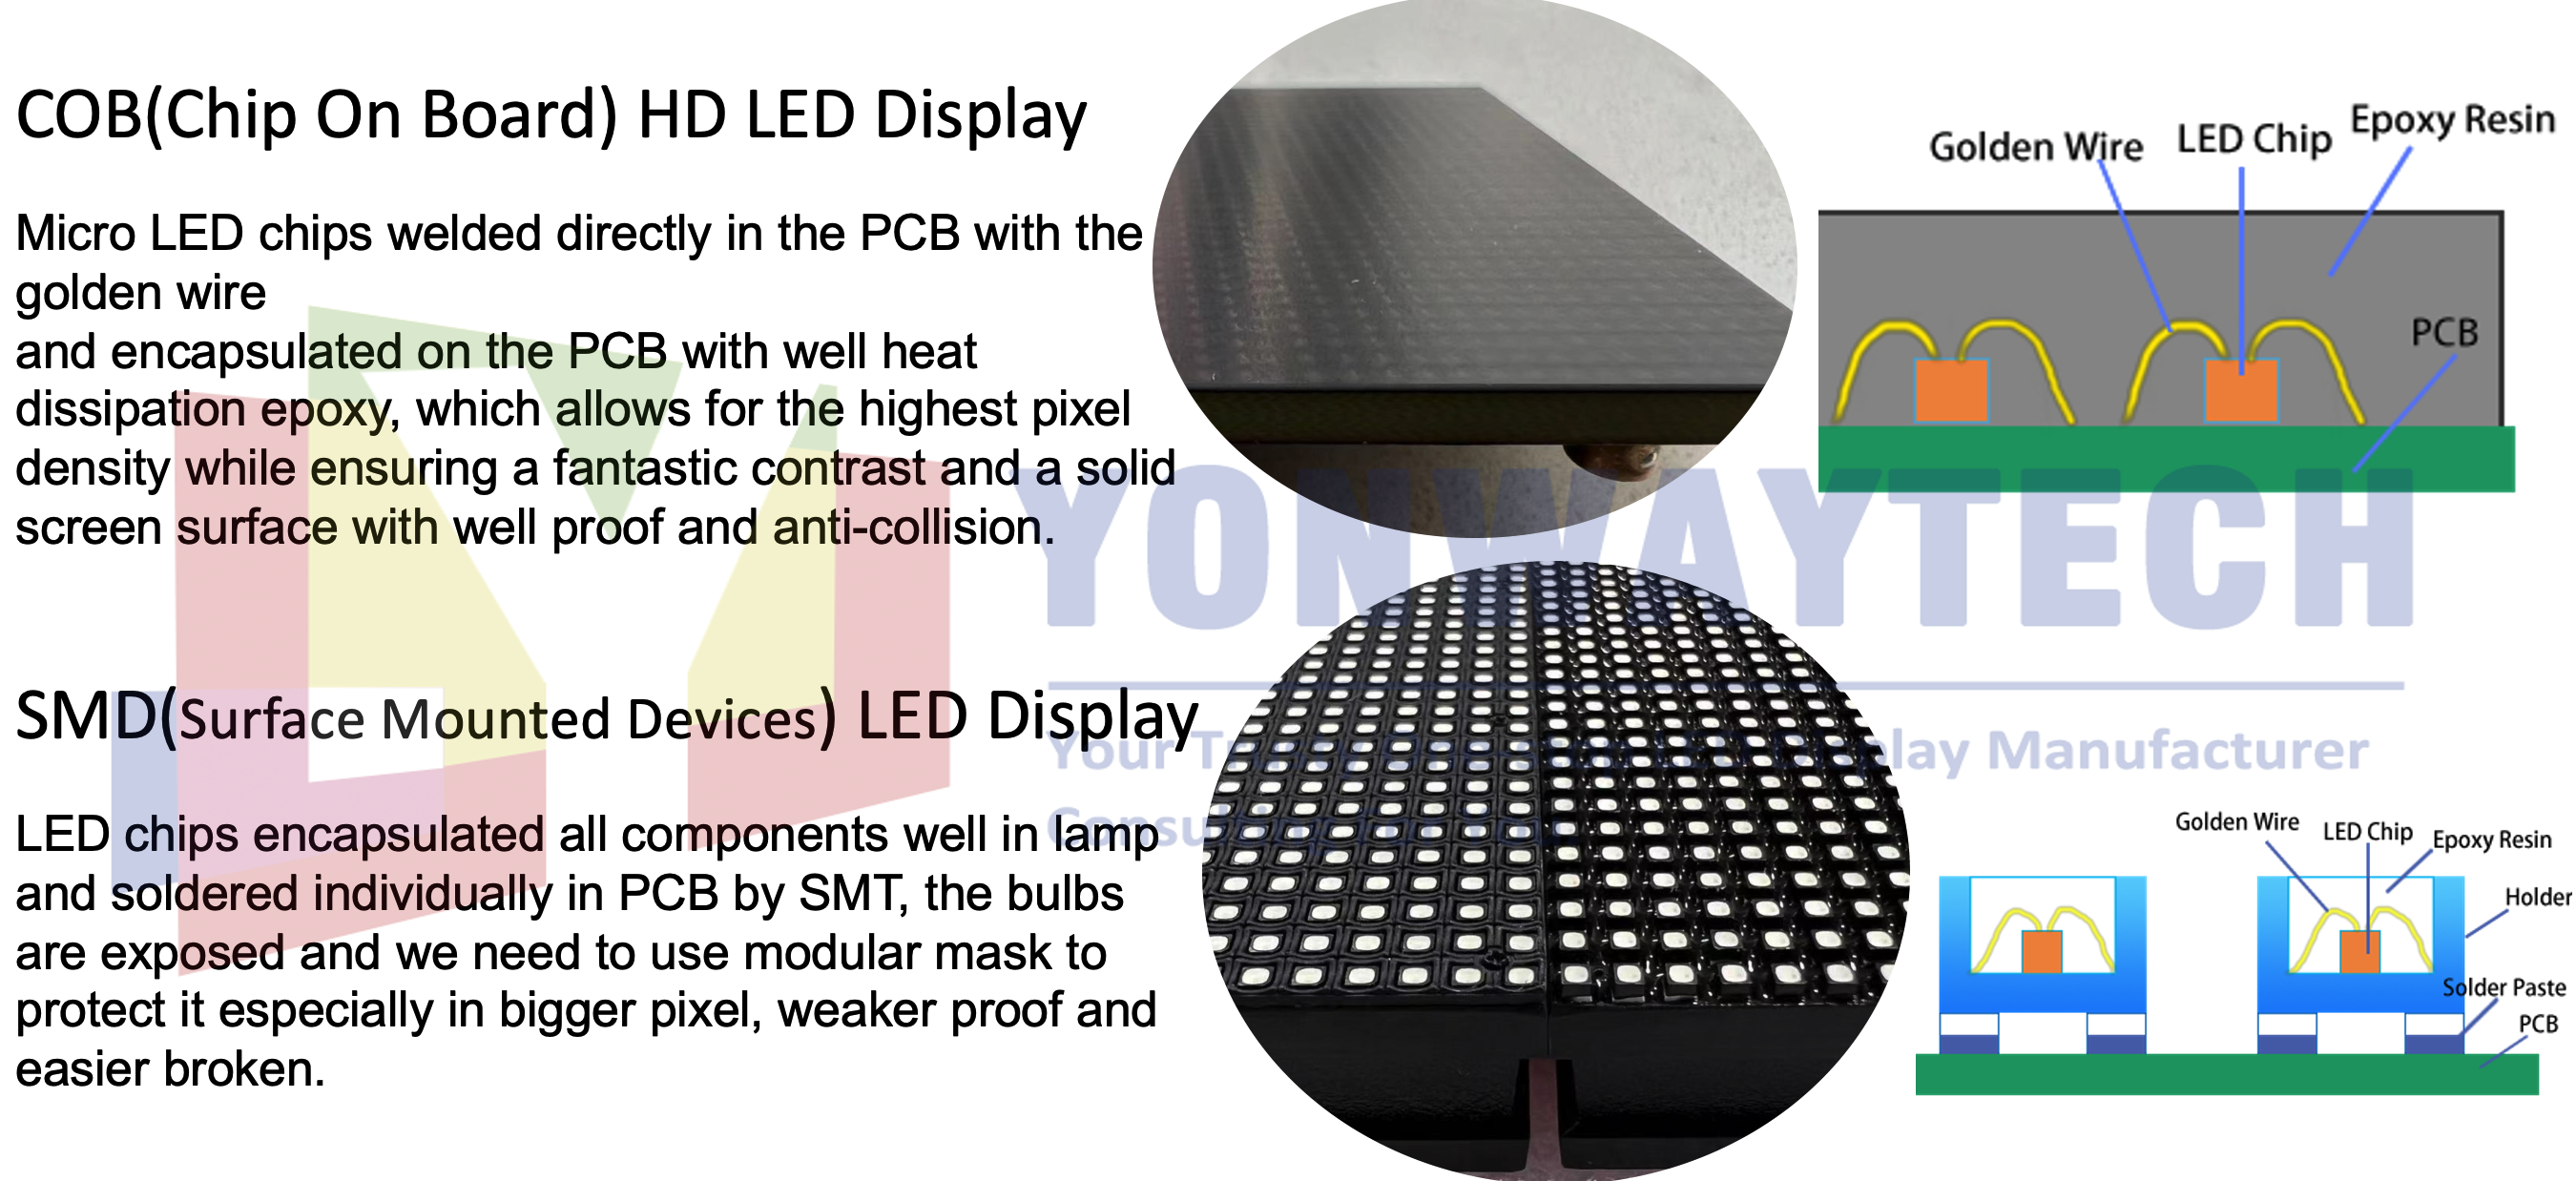 News - What Is COB LED Display Indeed?